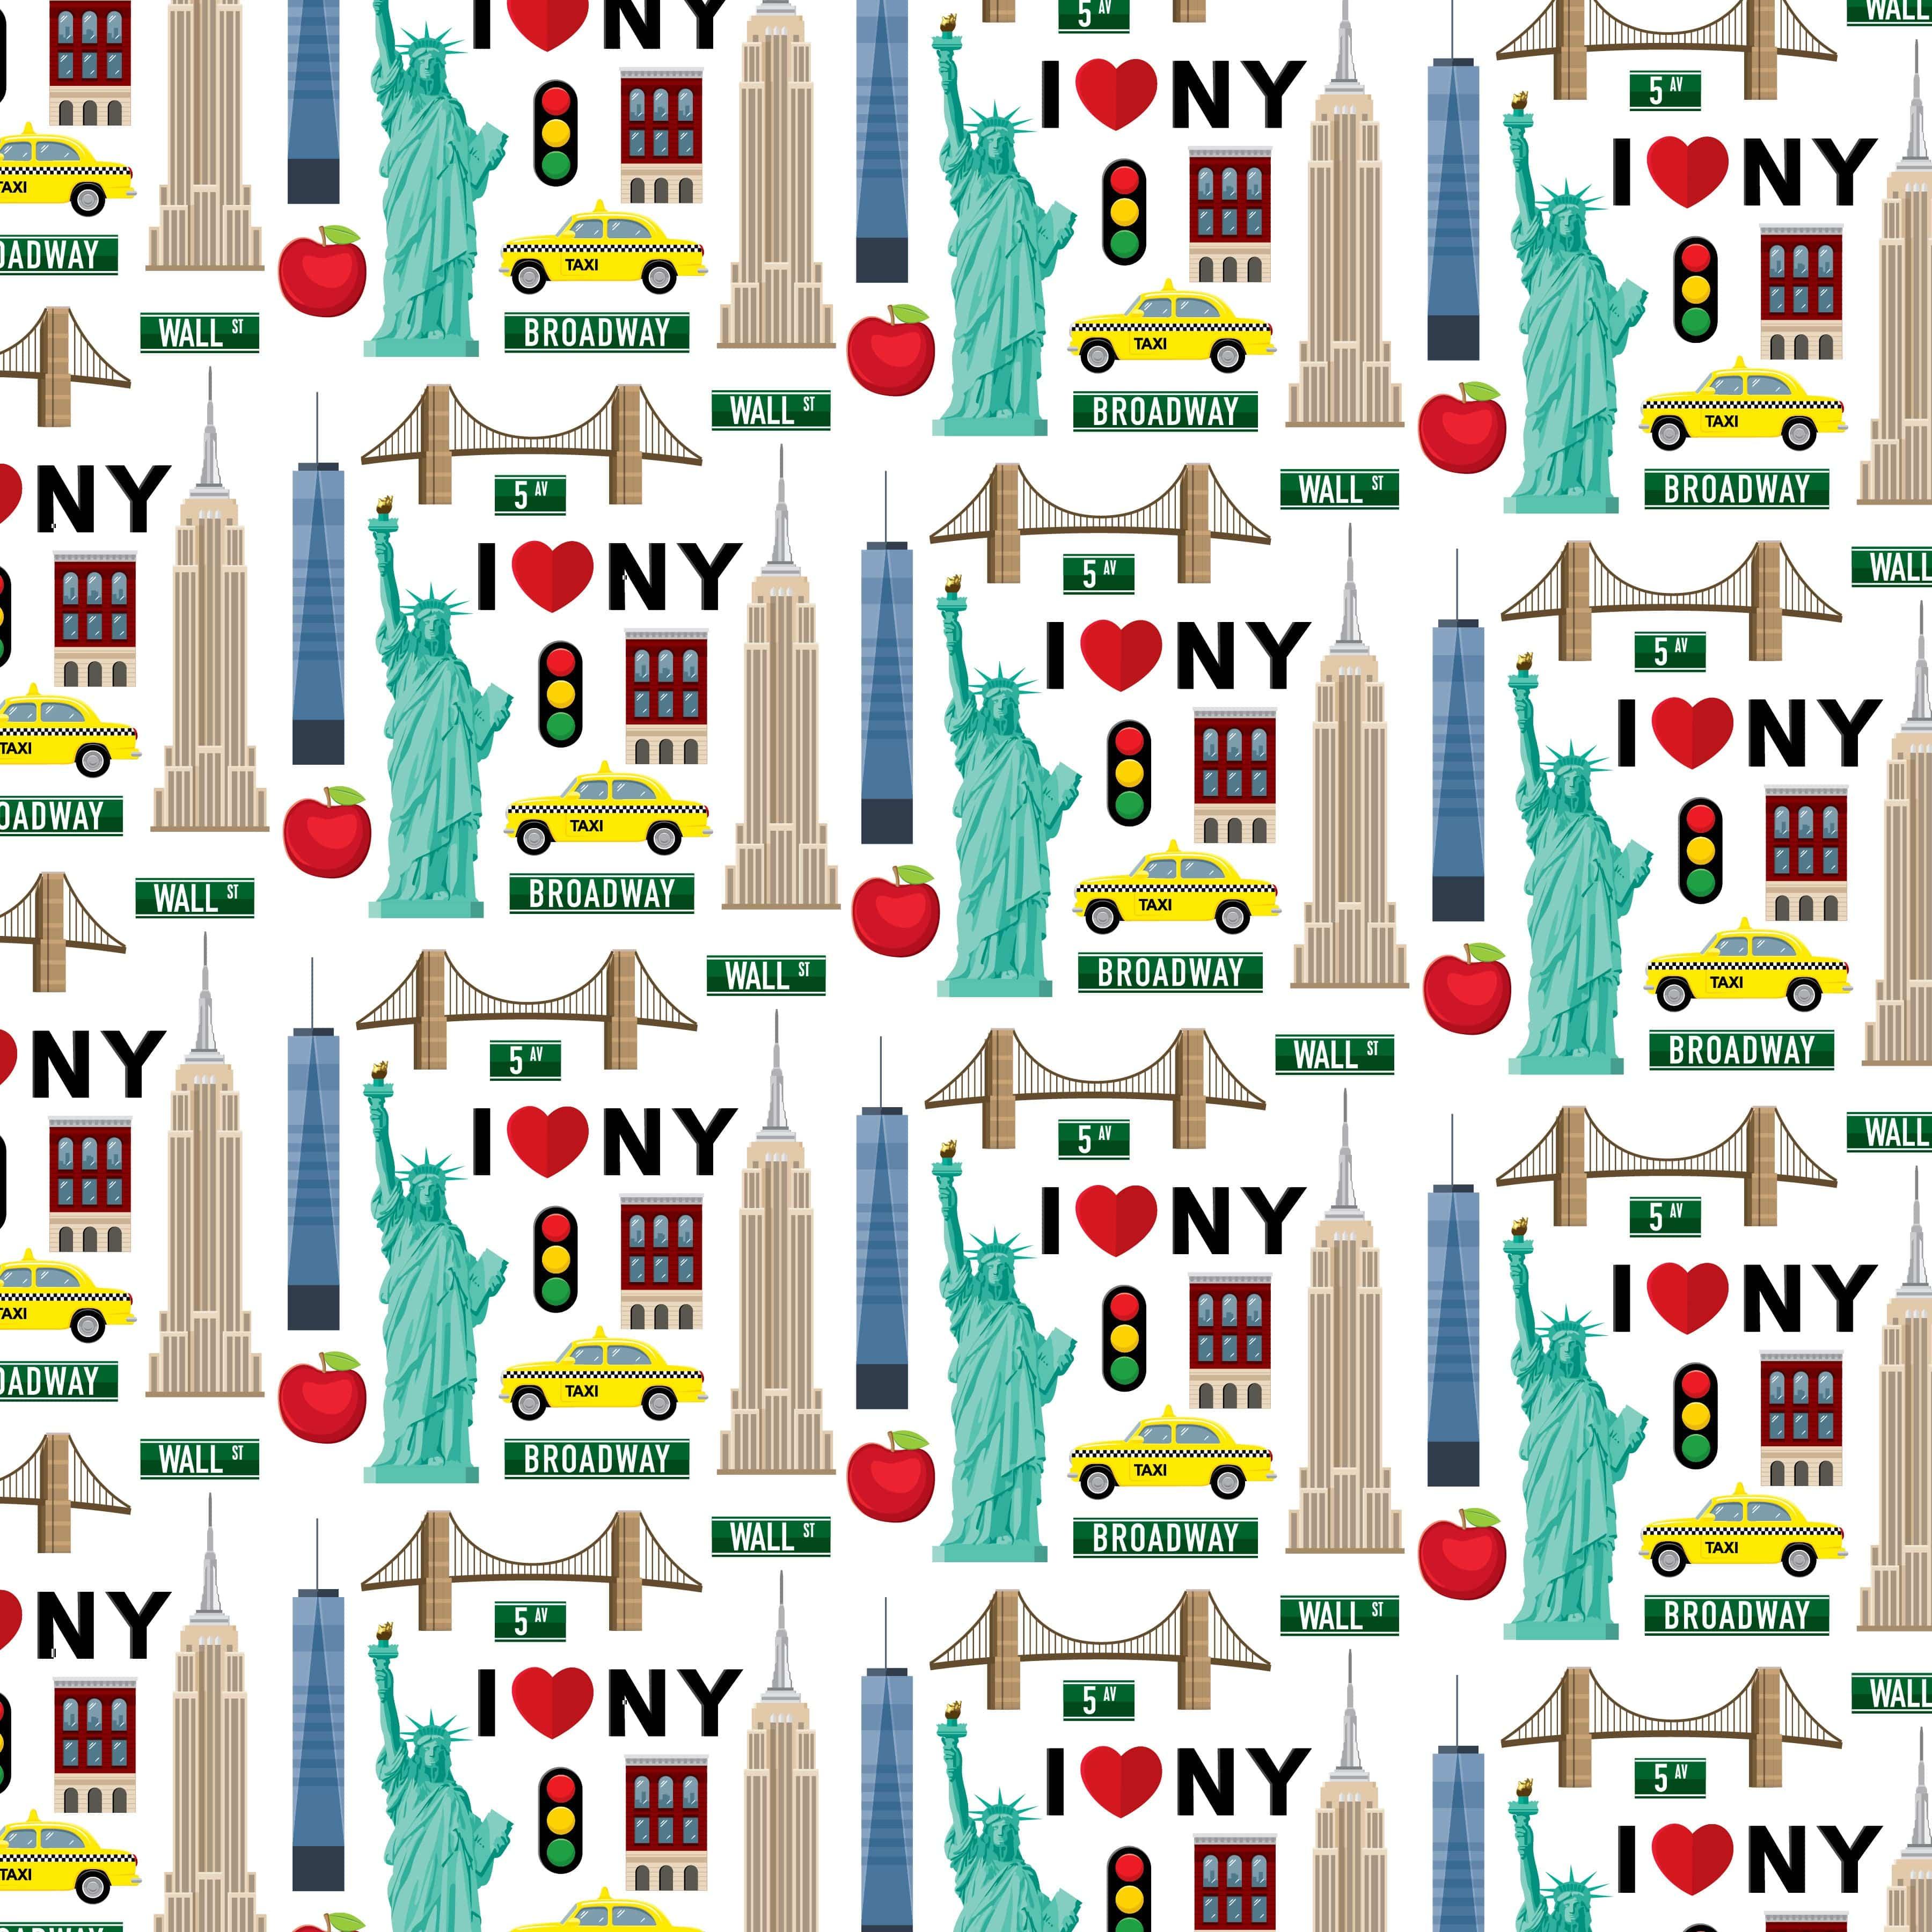 MNineDesign's New York Collection New York Icons 12 x 12 Double-Sided Scrapbook Paper by SSC Designs - Scrapbook Supply Companies